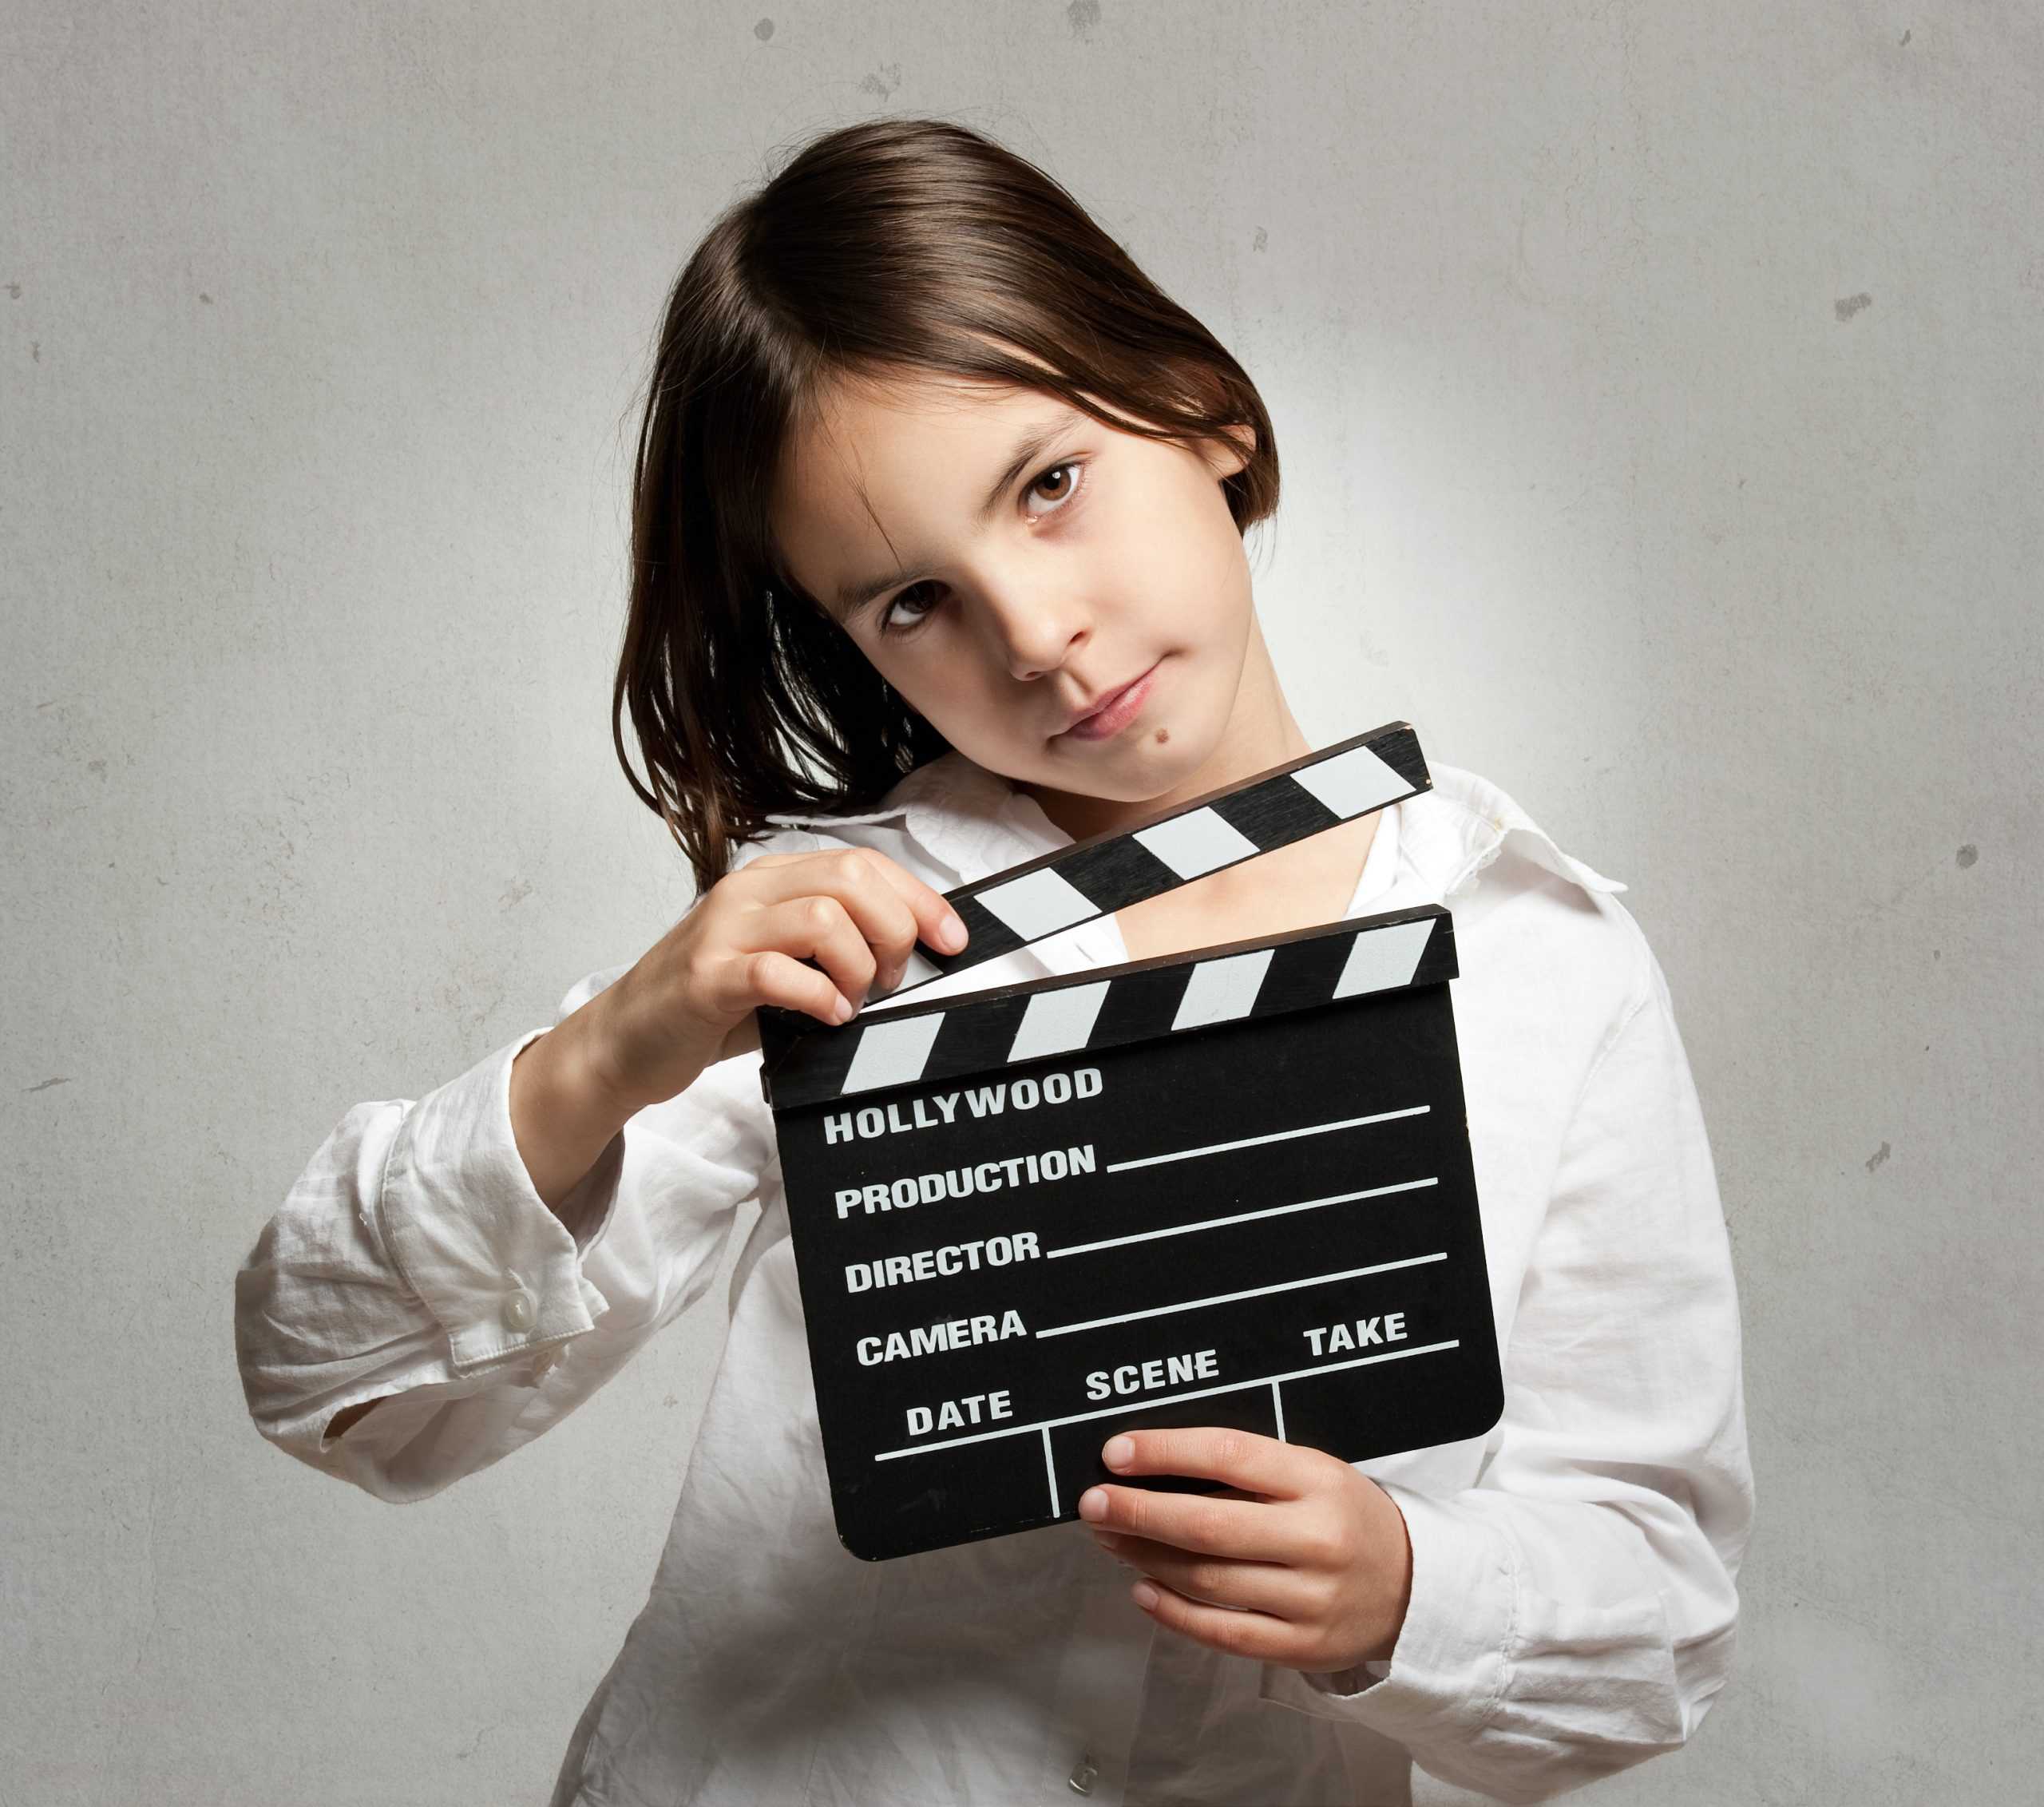 Tips for parents of child actors